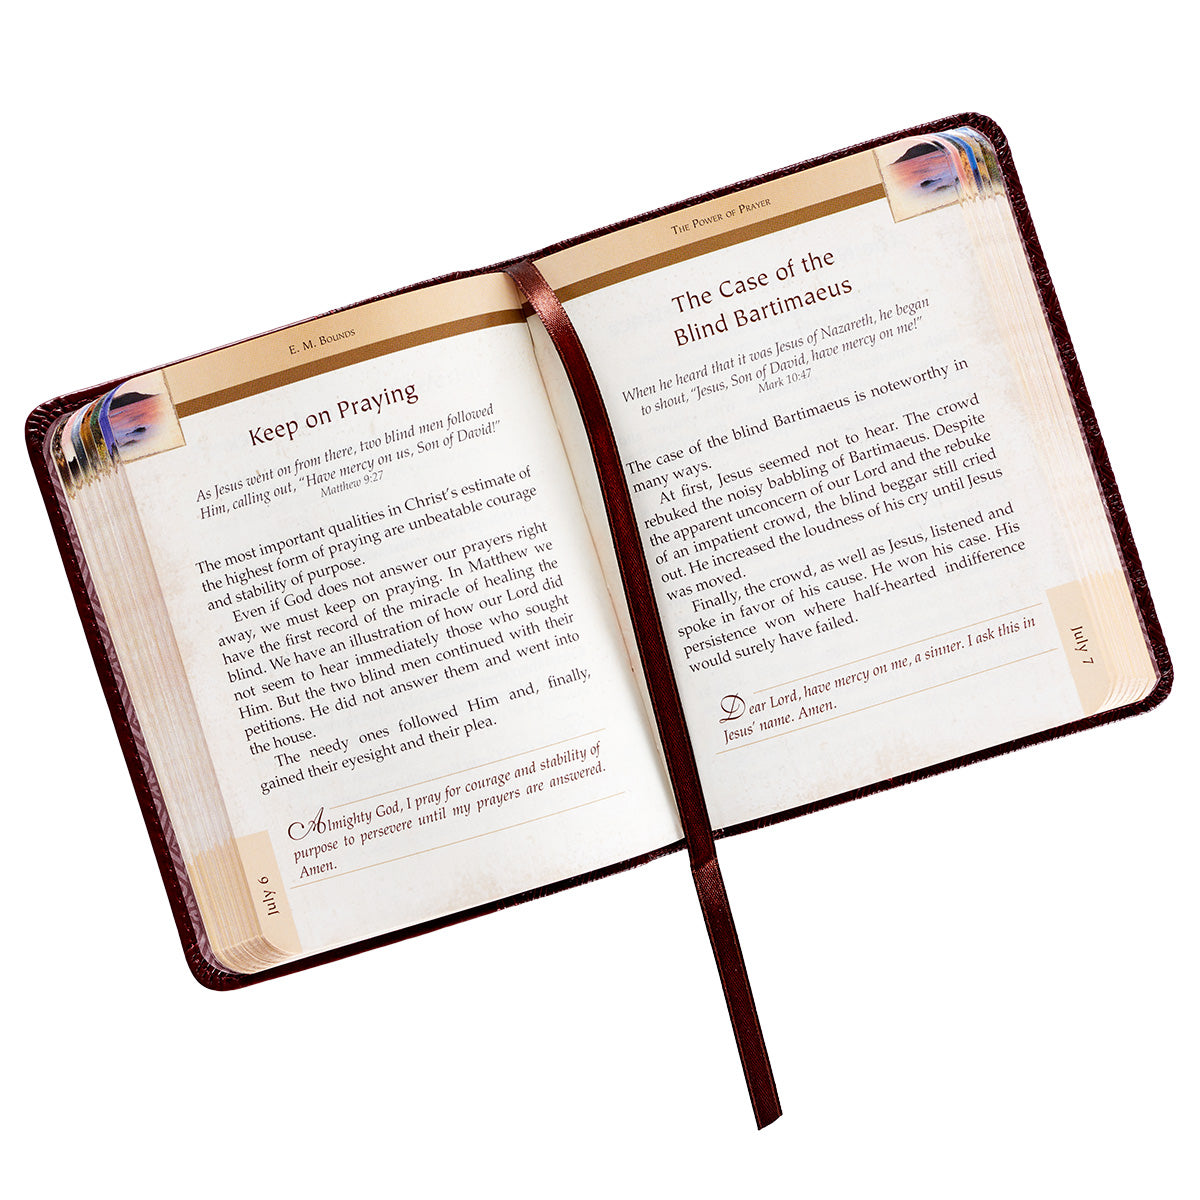 The Power of Prayer Brown Faux Leather One-Minute Devotions - The Christian Gift Company